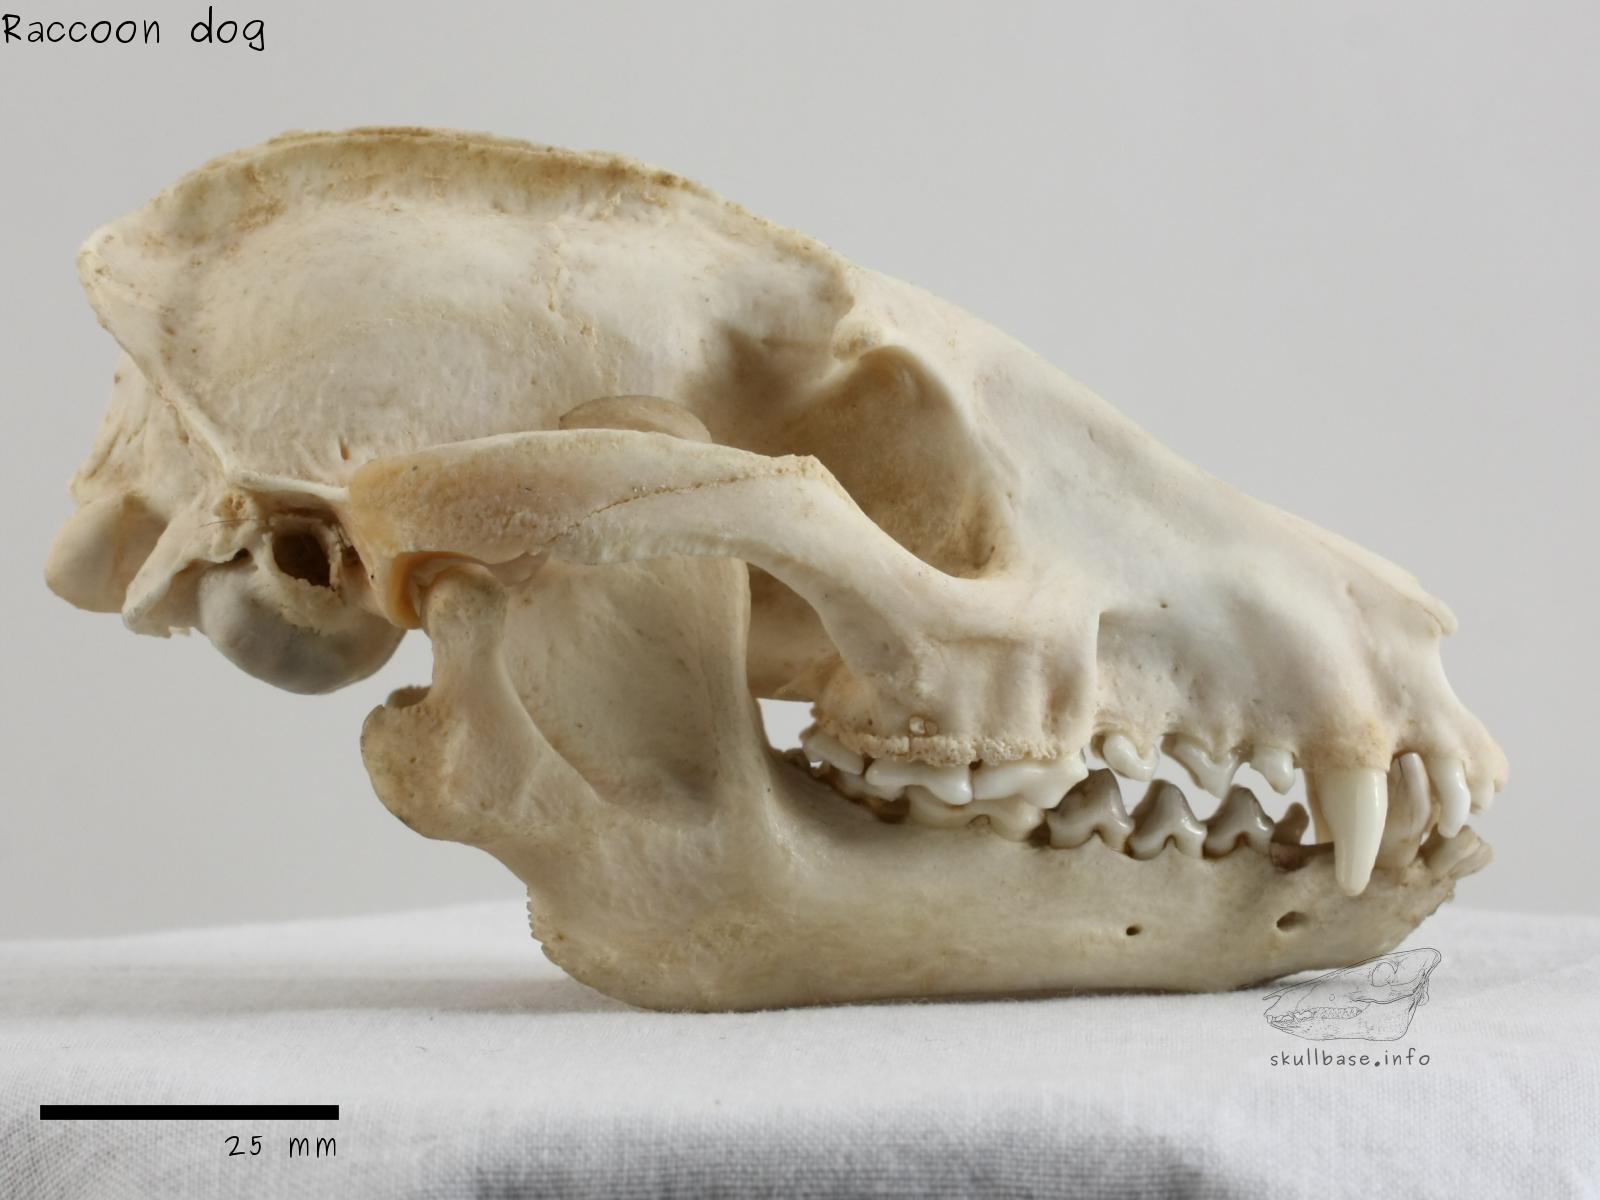 Raccoon dog (Nyctereutes procyonoides) skull lateral view